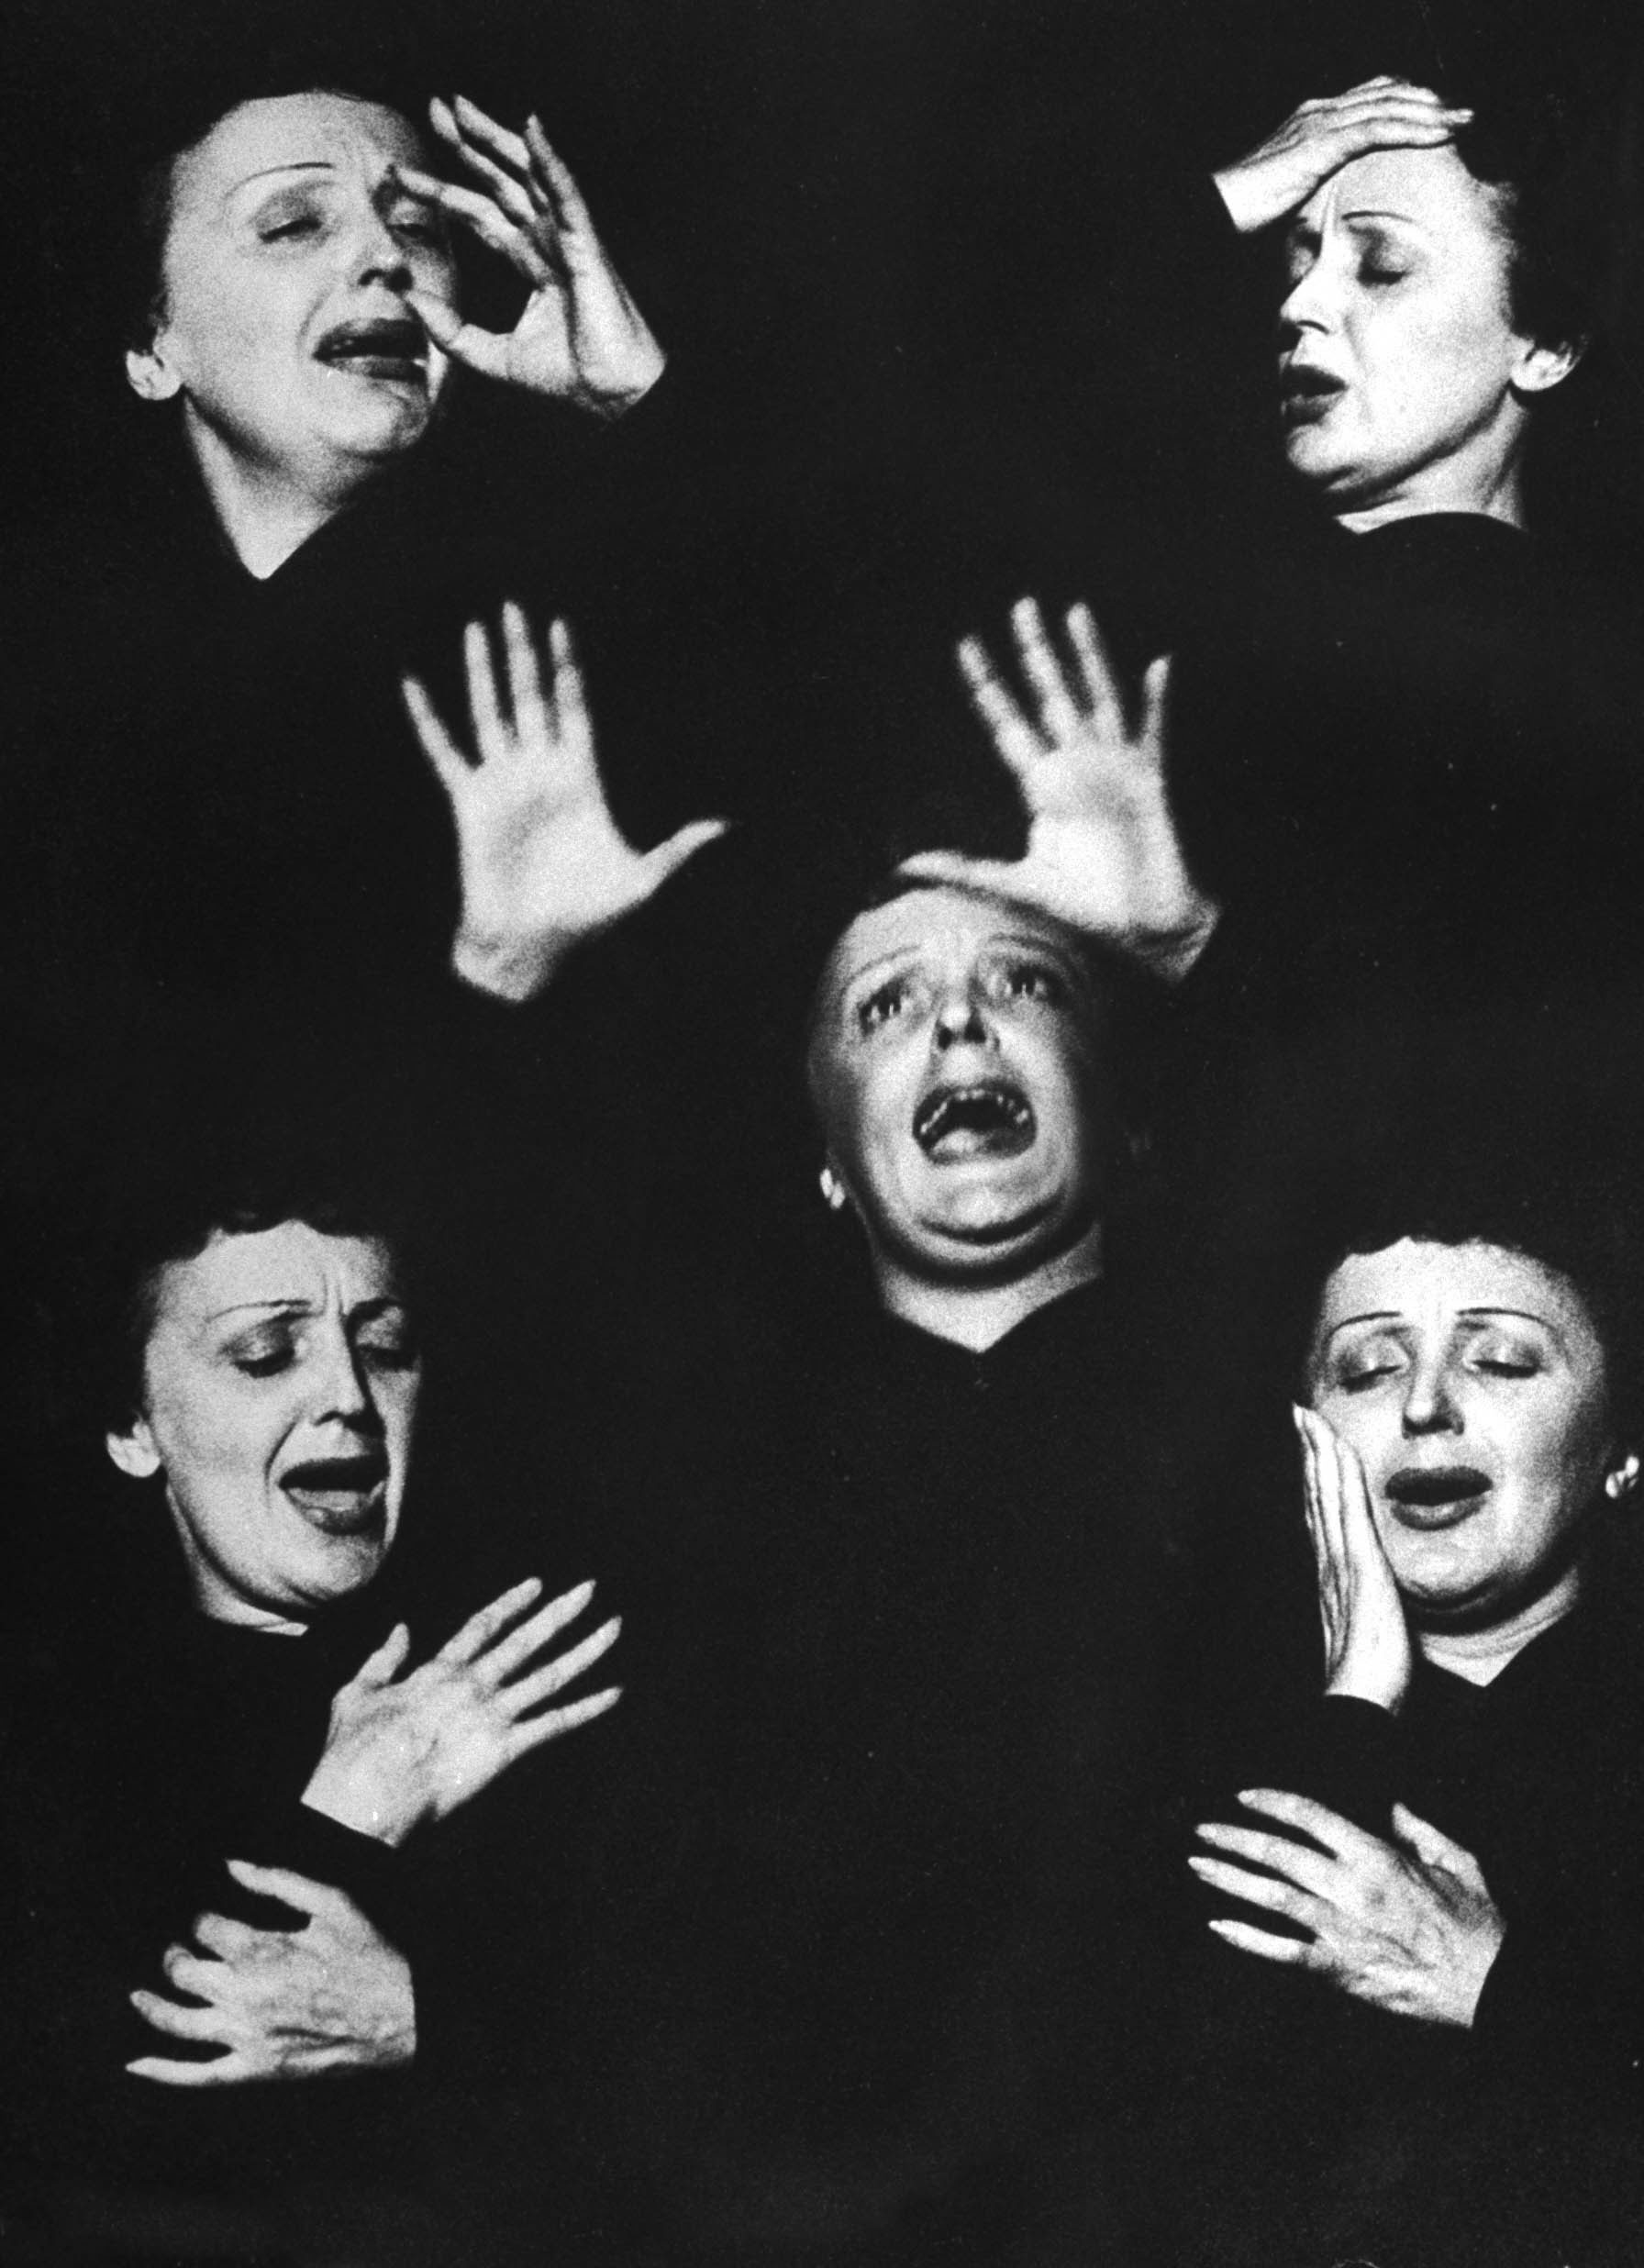 Edith Piaf caught in a montage of expressions and gestures while singing during her performance at New York's Versailles nightclub, 1952.